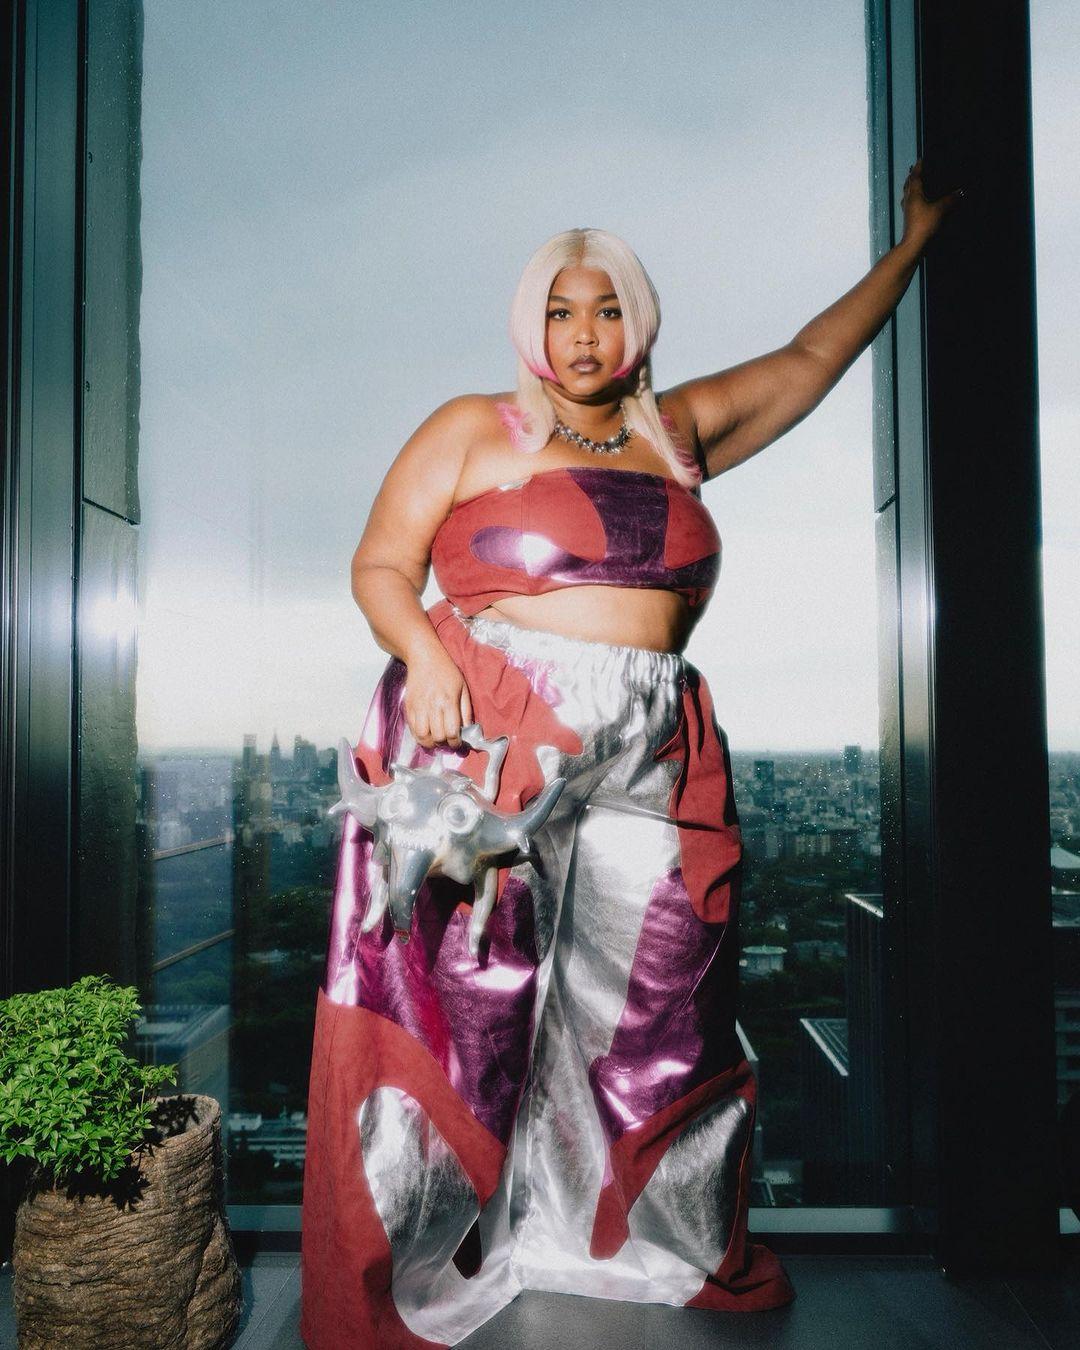 Lizzo Debuts Striking Layered Bob Hairdo & Octopus-inspired Style Amid Legal Trouble